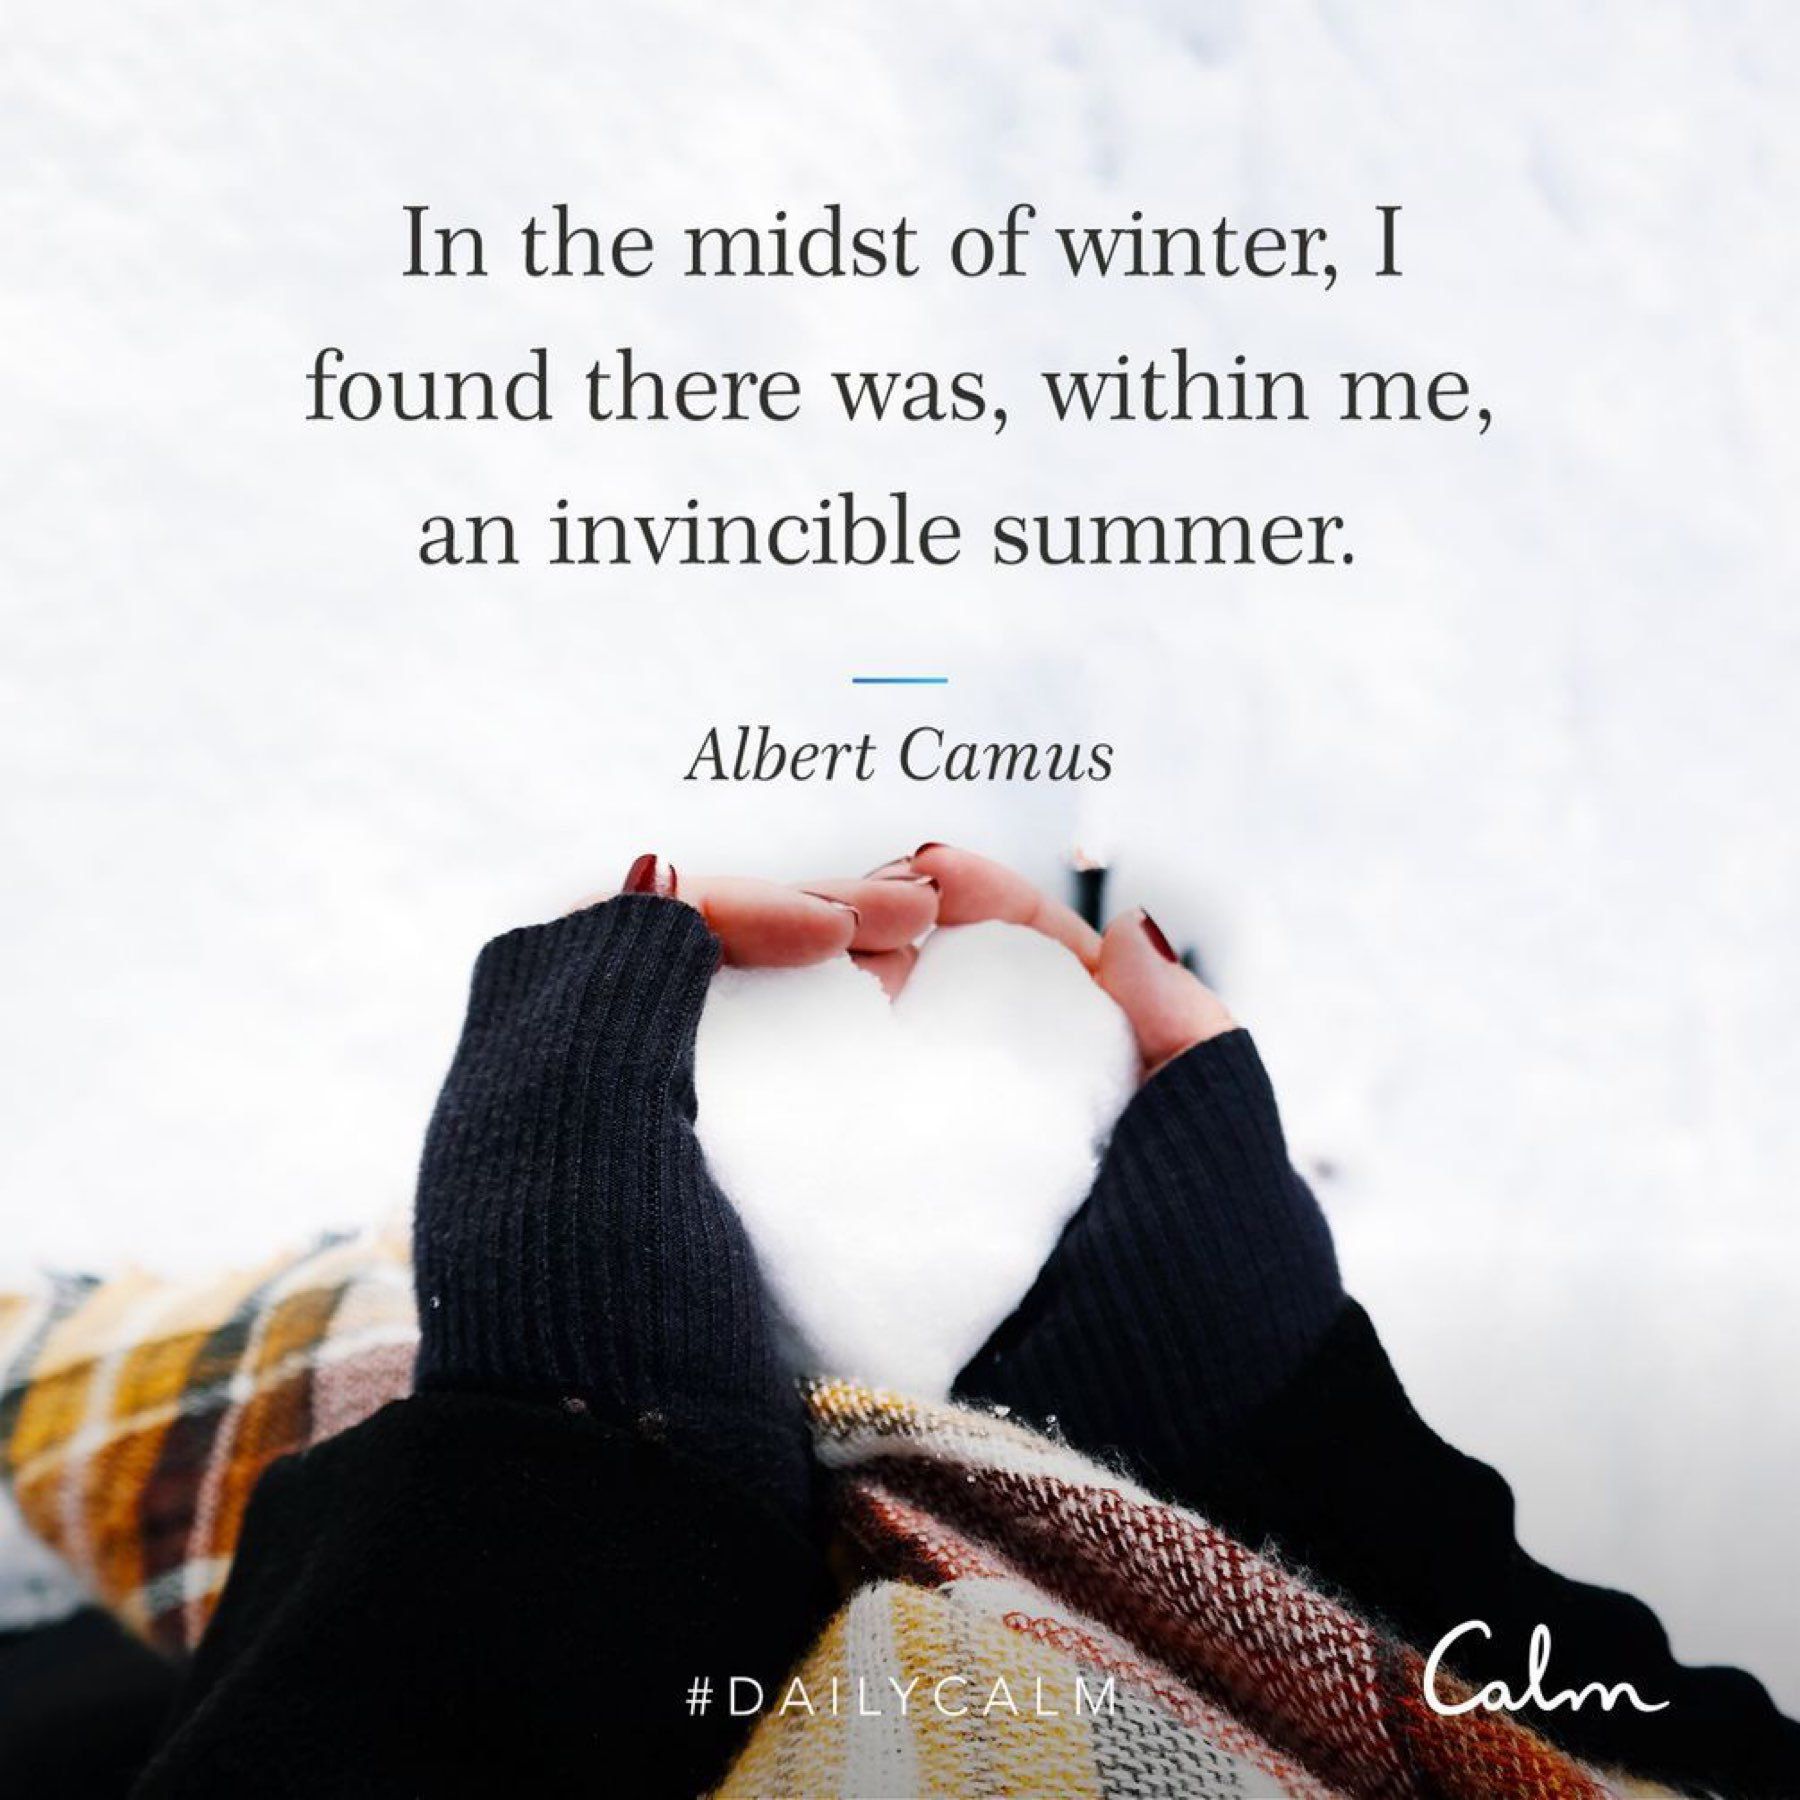 In the midst of winter I found summer within me